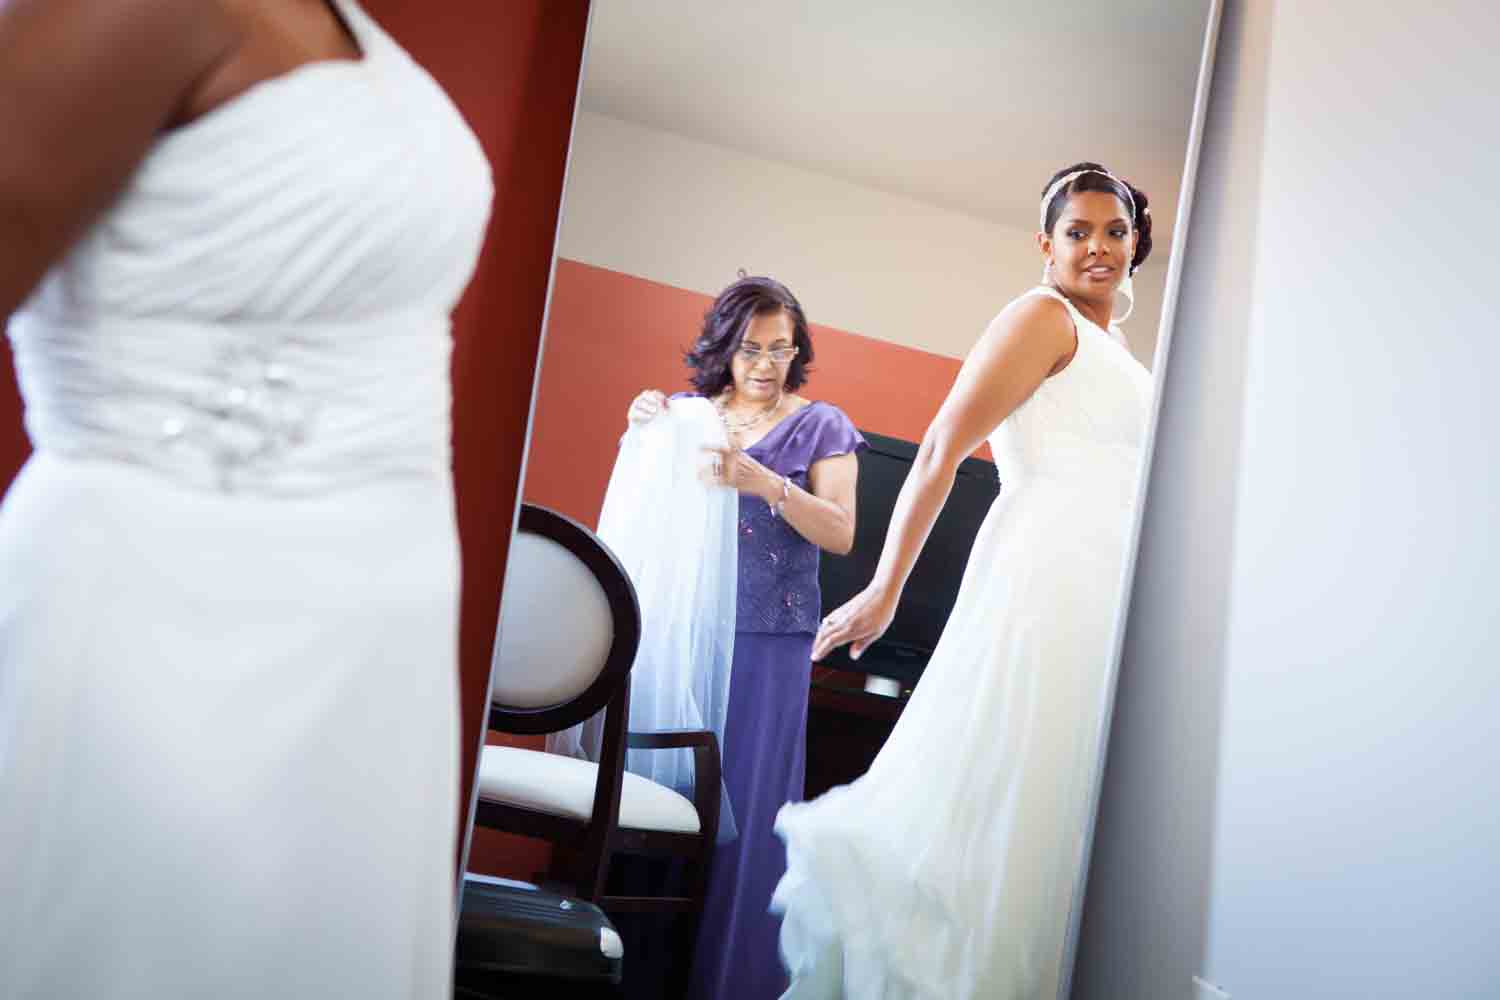 Bride looking at reflection of white dress in mirror